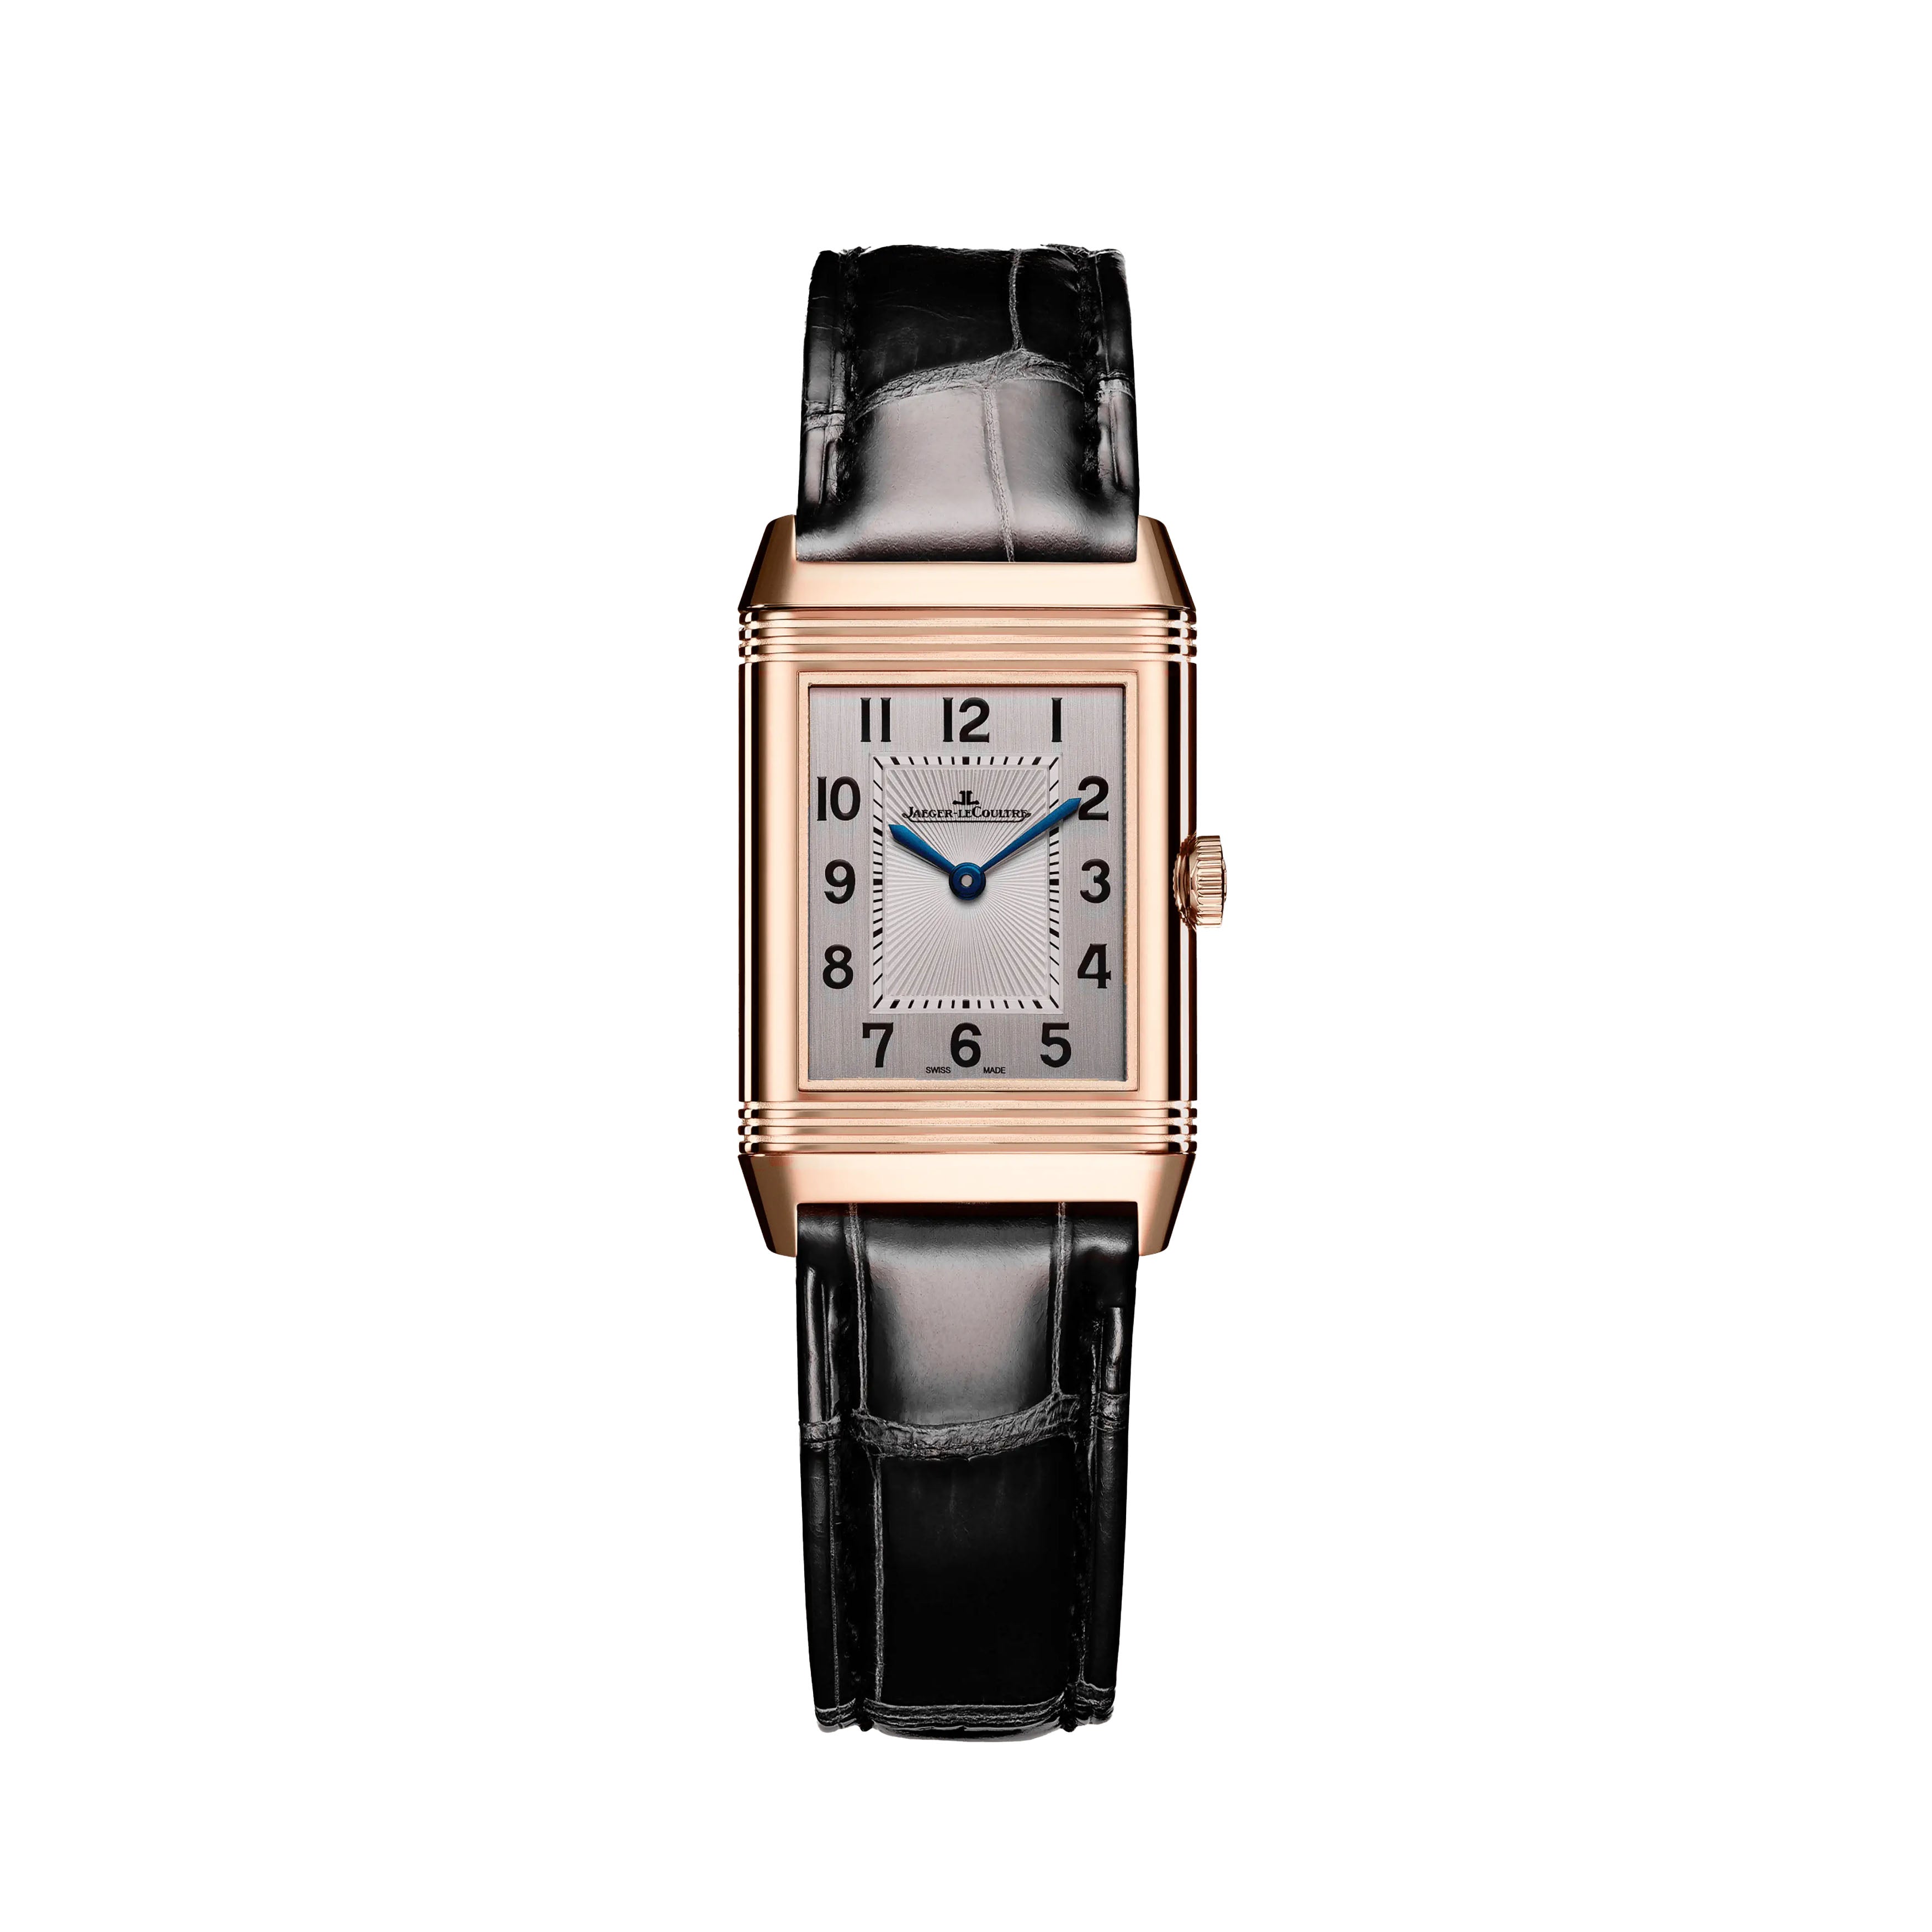 Jaeger-LeCoultre Reverso Classic Duetto Watch, 34.2x21mm Silver Dial, Q2662530